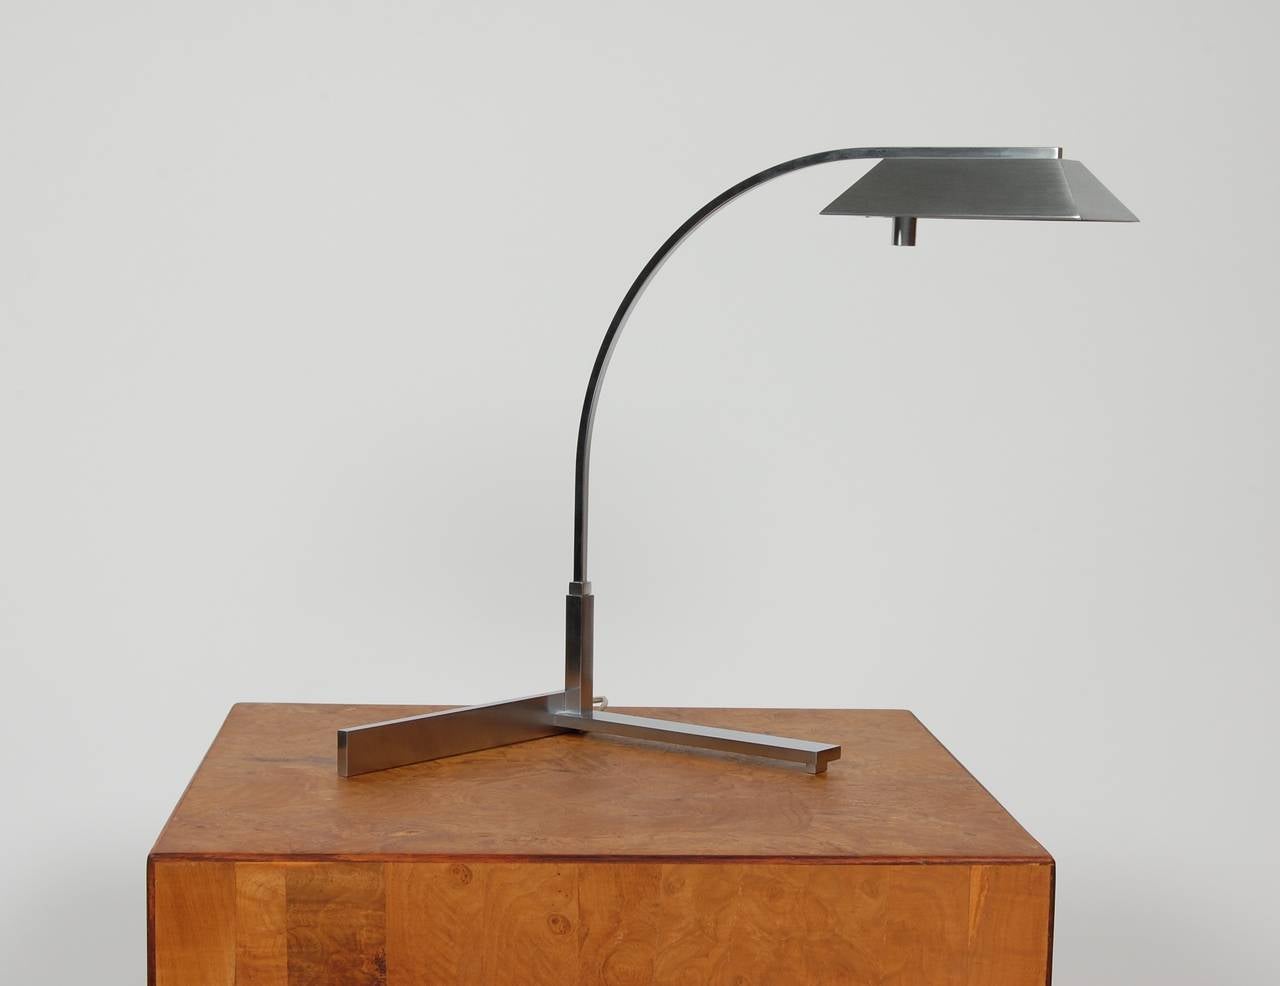 Brushed nickel finish 1970s era Casella desk lamp with a swinging lamp arm that moves from right to left on a V-shaped base. The shade is a tapered rectilinear form with an adjustable halogen light. Casella lamp is a company that is well-known for